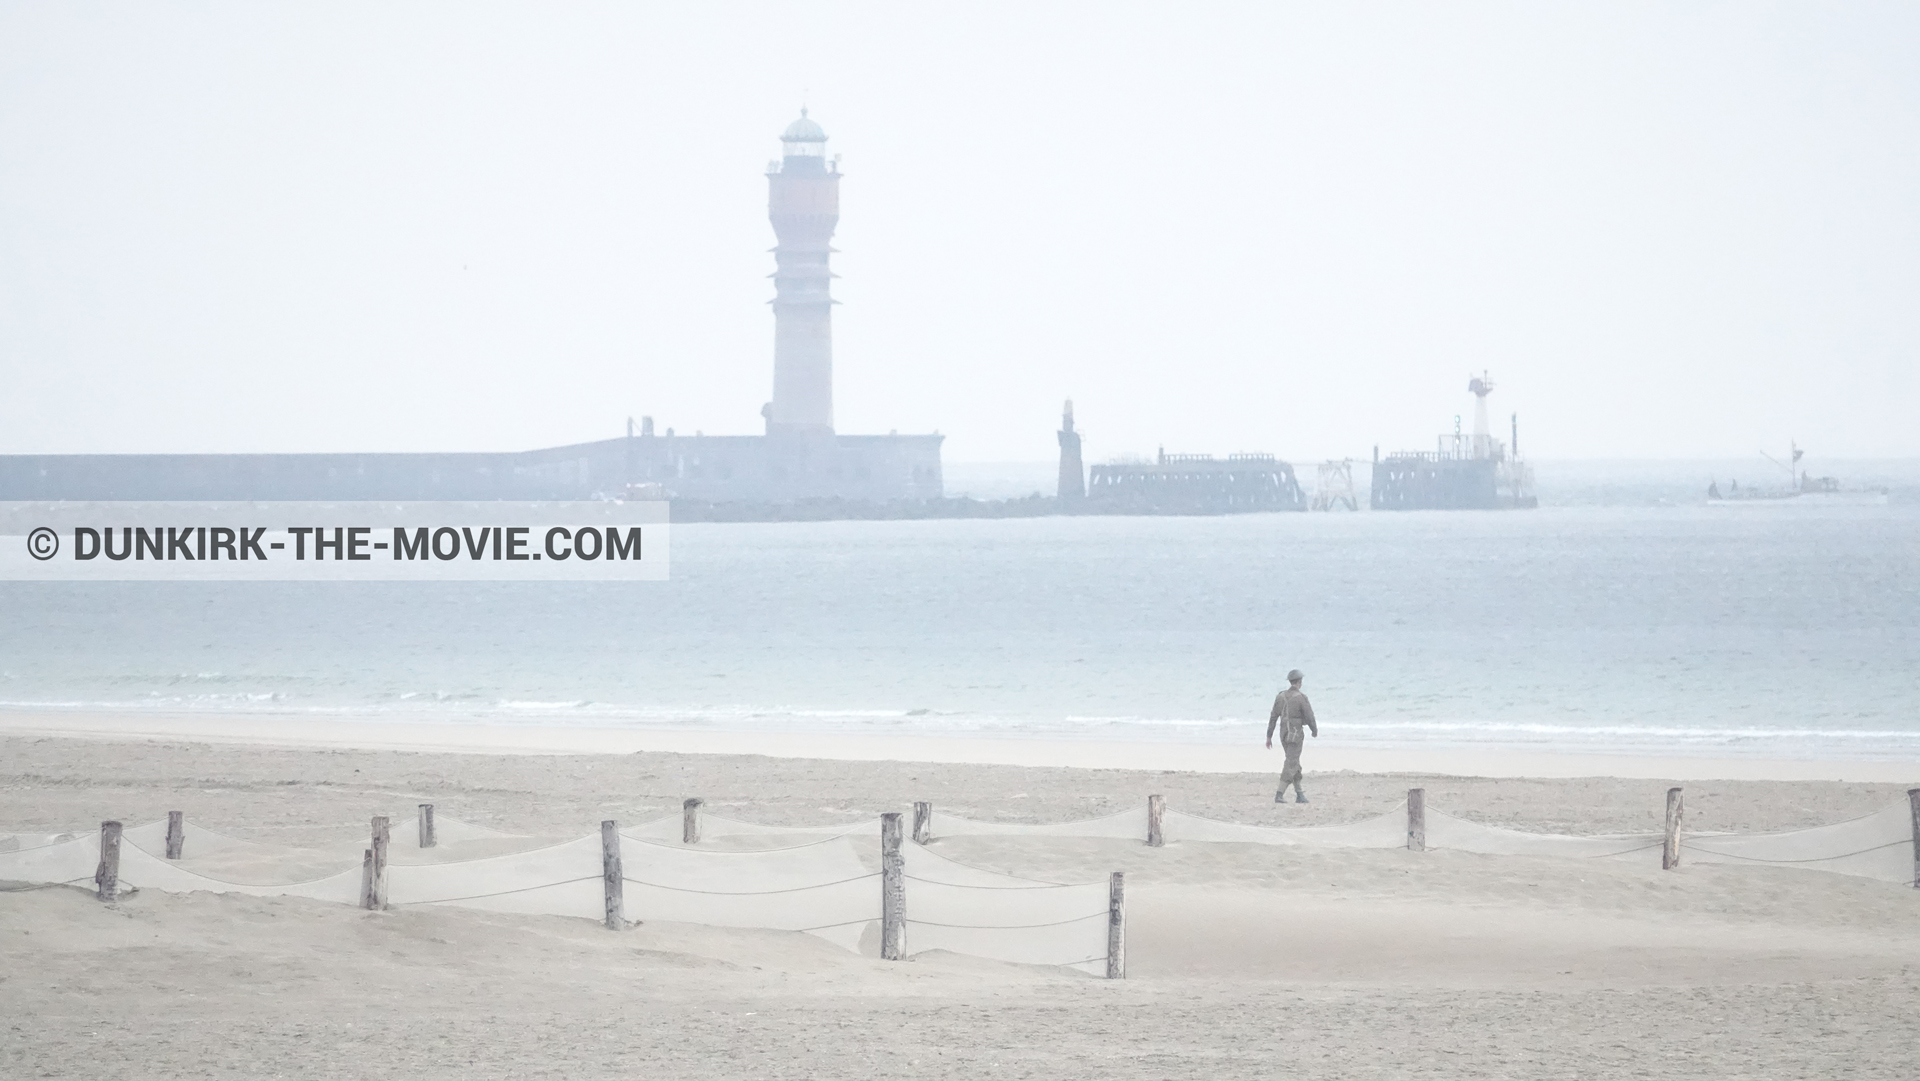 Picture with supernumeraries, St Pol sur Mer lighthouse, beach,  from behind the scene of the Dunkirk movie by Nolan